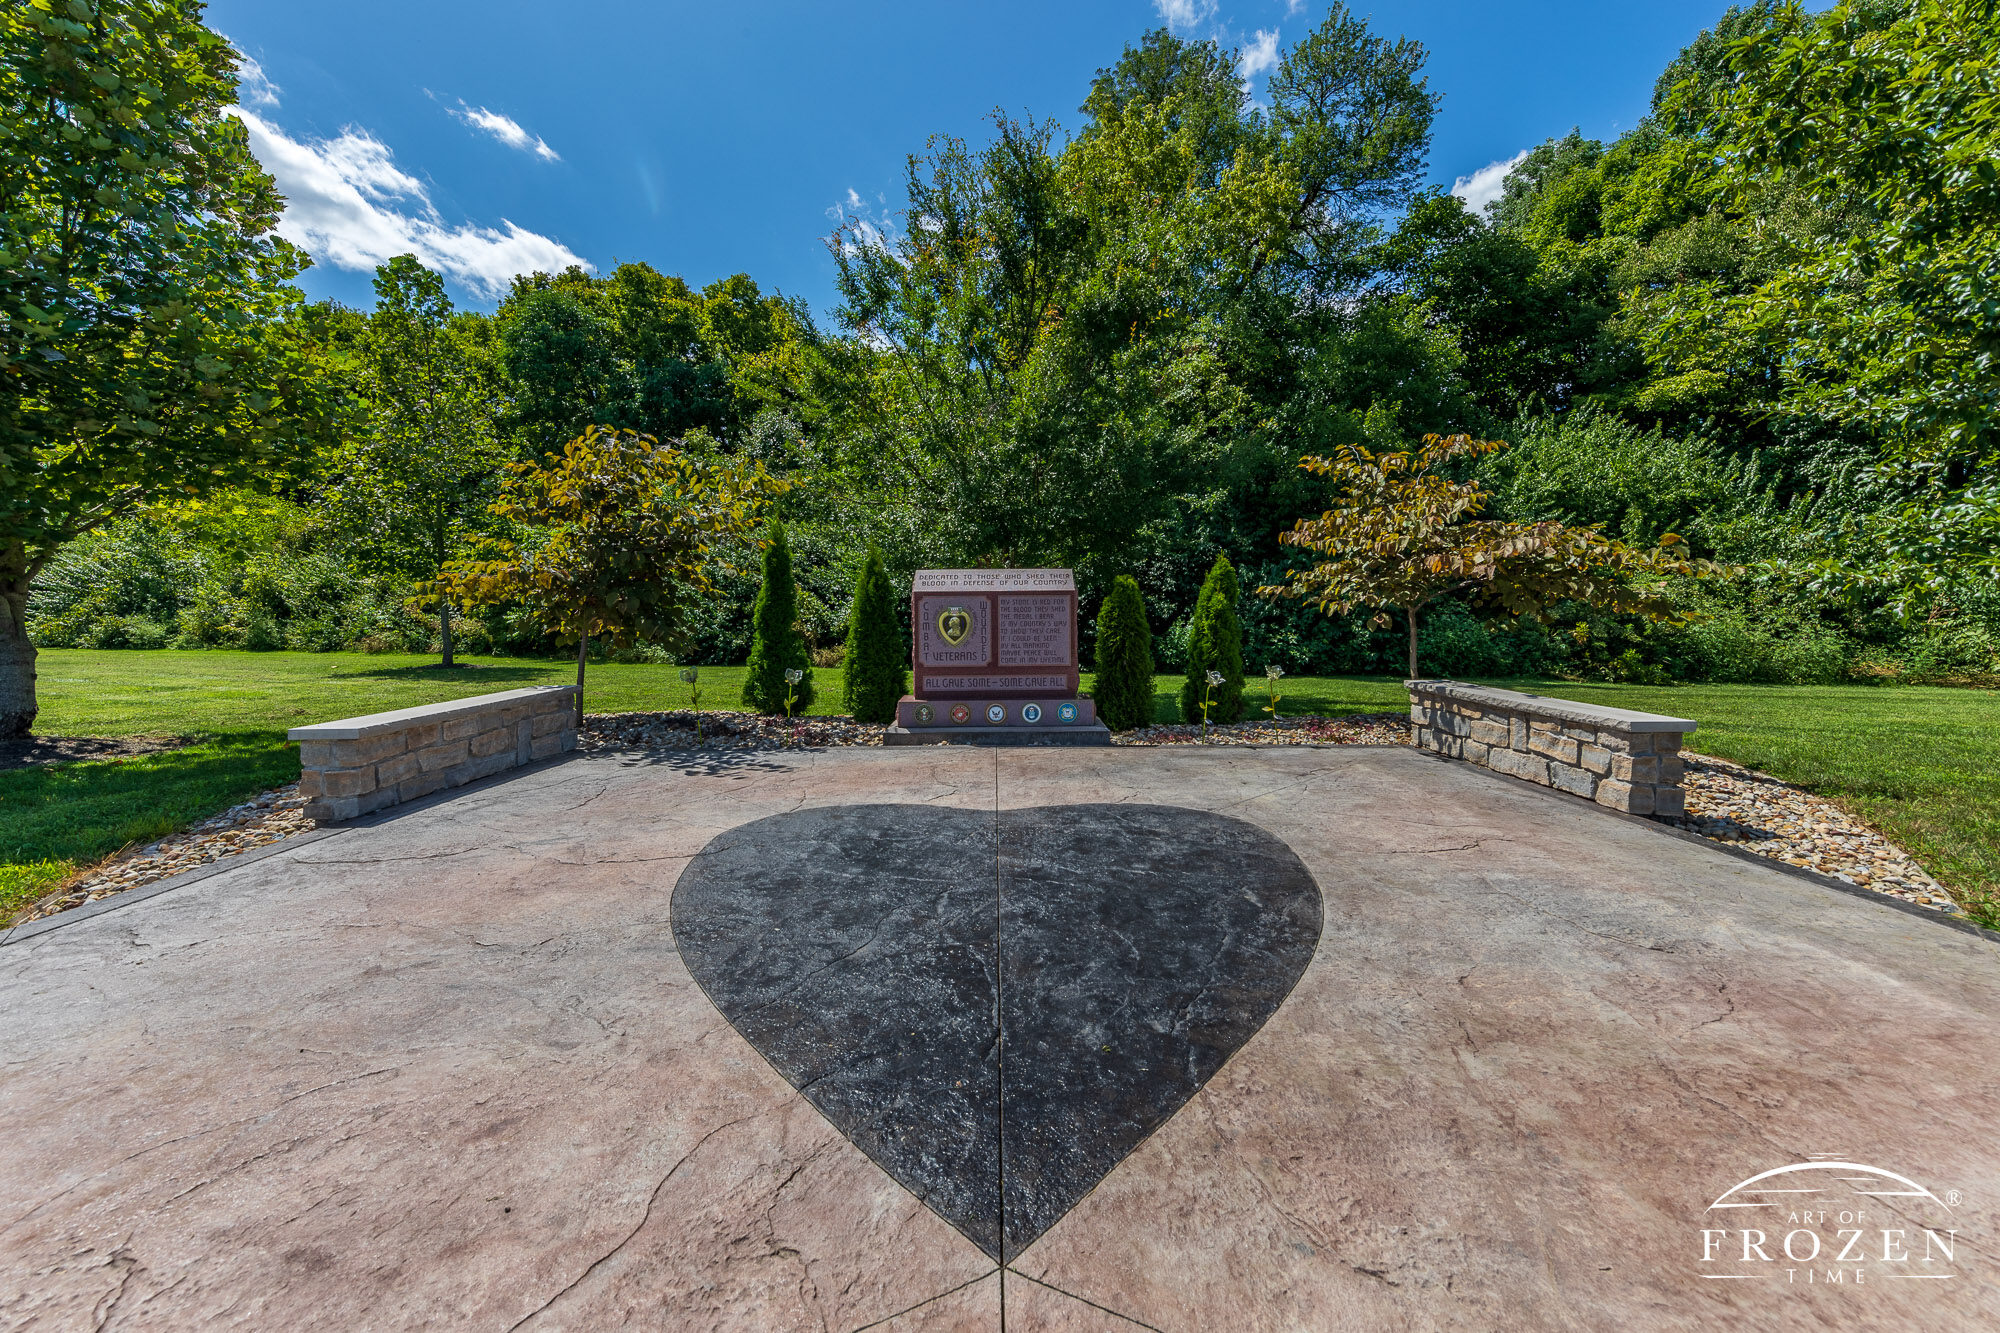 A view of Springboro Ohio’s Purple Heart memorial where designers placed a large heart in stamped concrete to the foreground of the city’s granite memorial